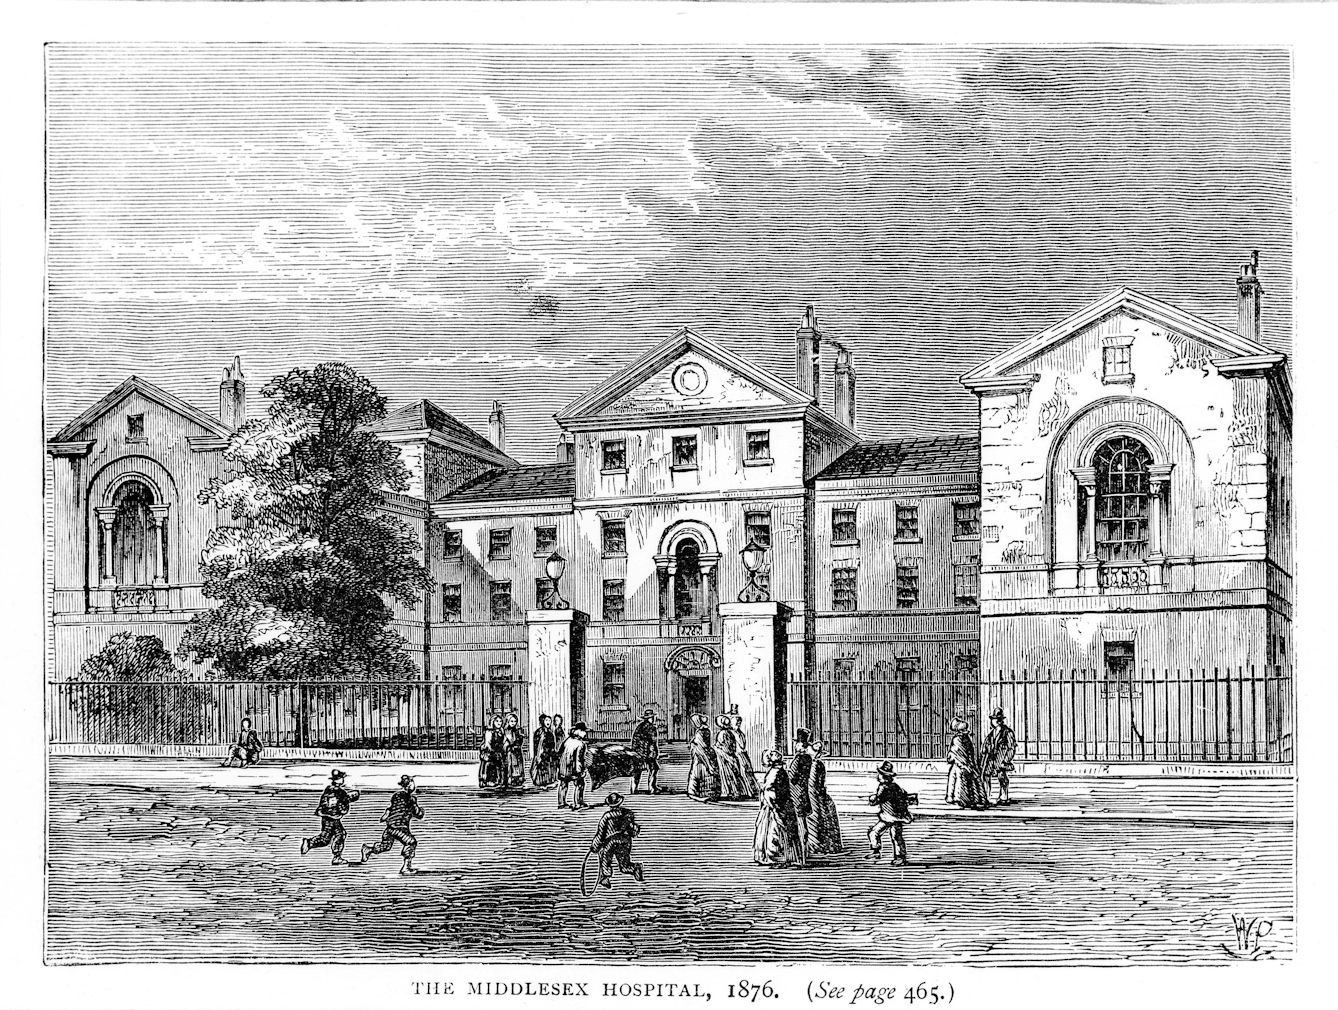 Engraving of the Middlesex Hospital building with figures pictured in the foreground